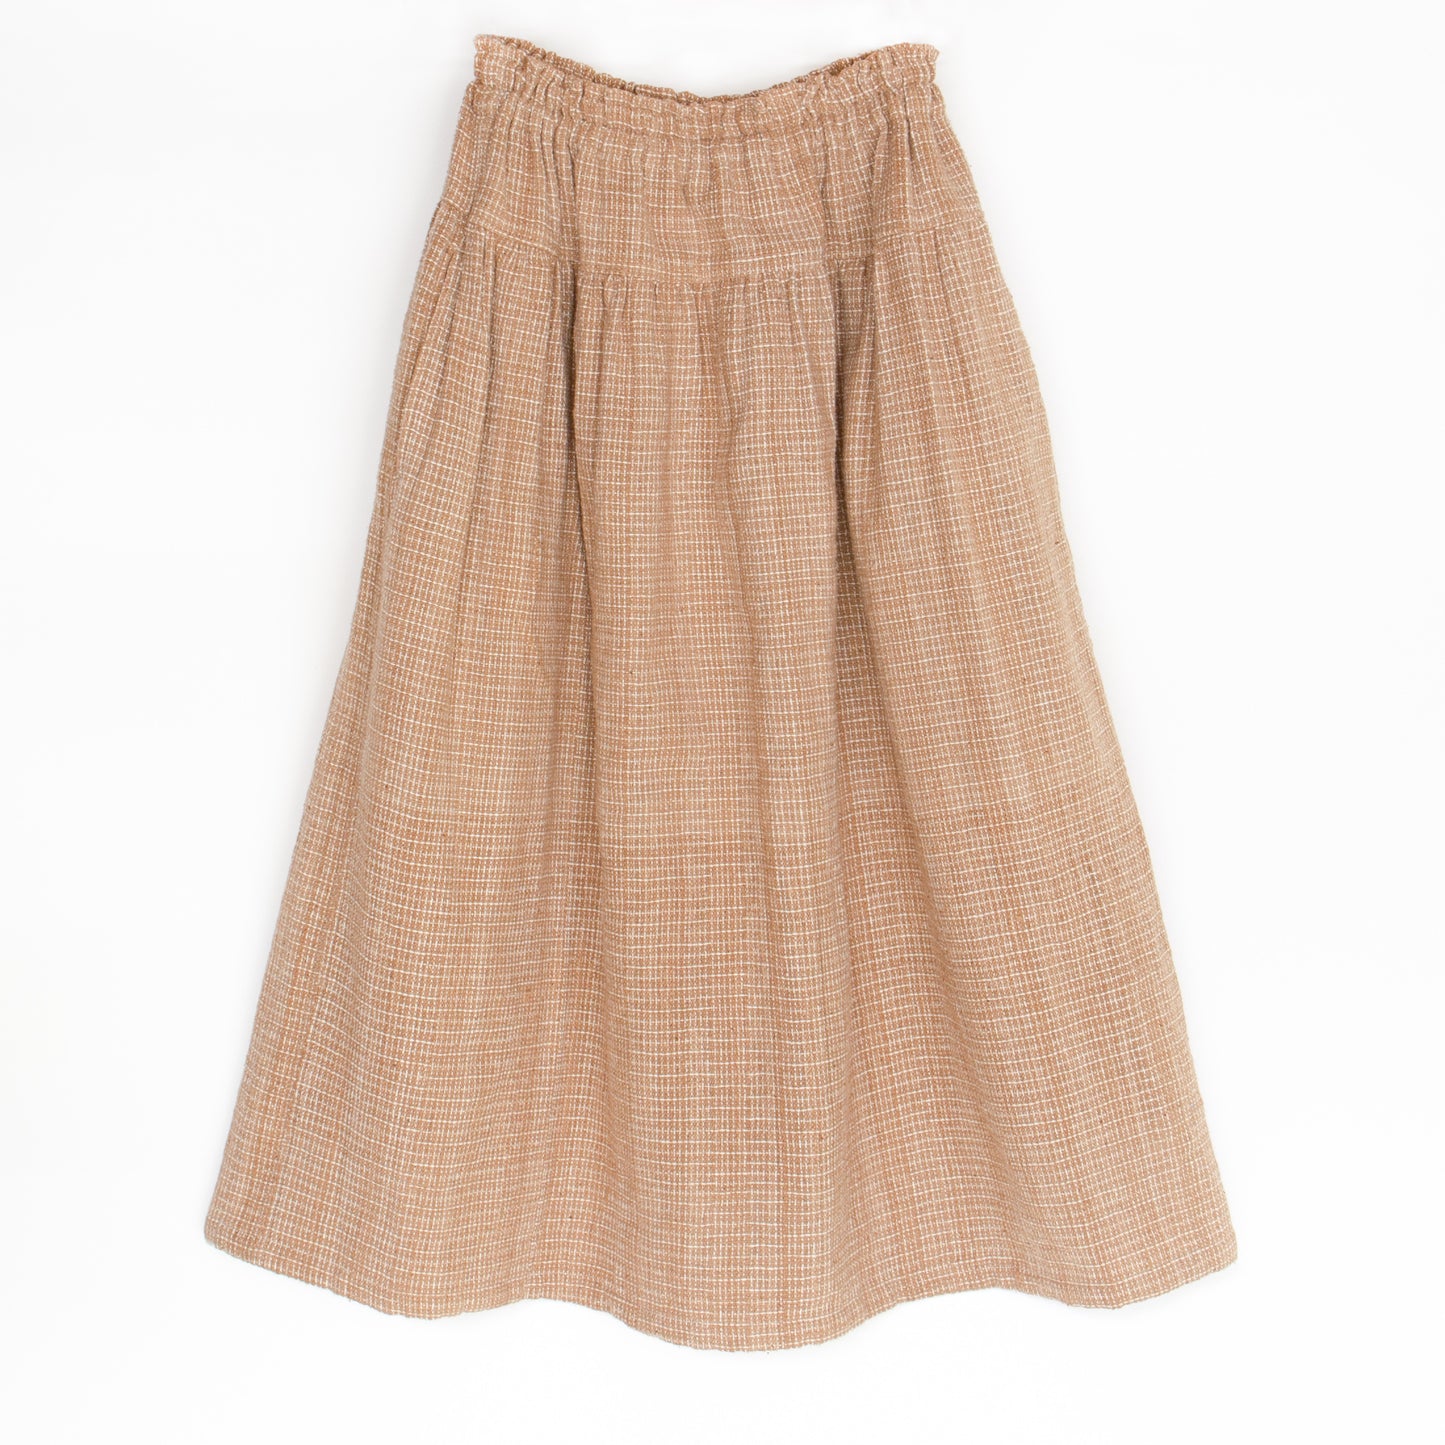 2 colors gather skirt